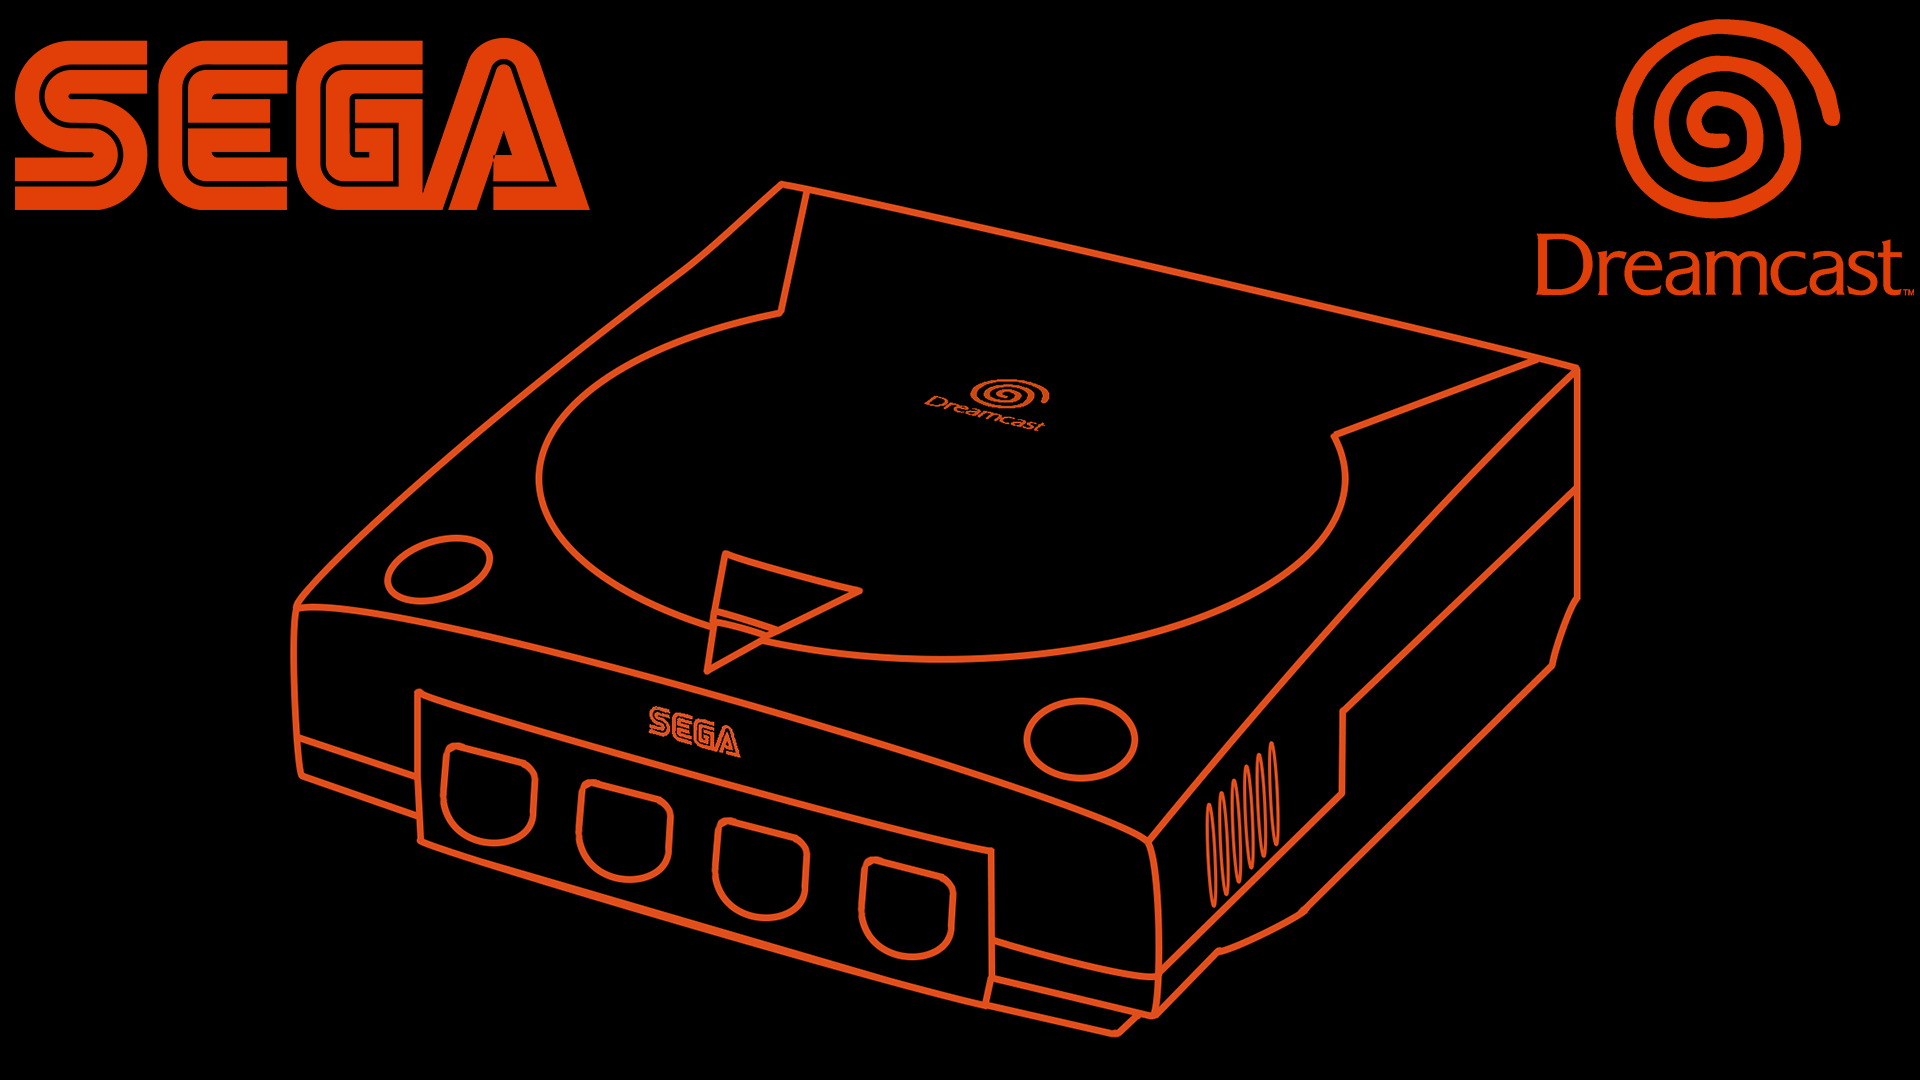 Made These Dreamcast Wallpaper Hope You Like Them Google